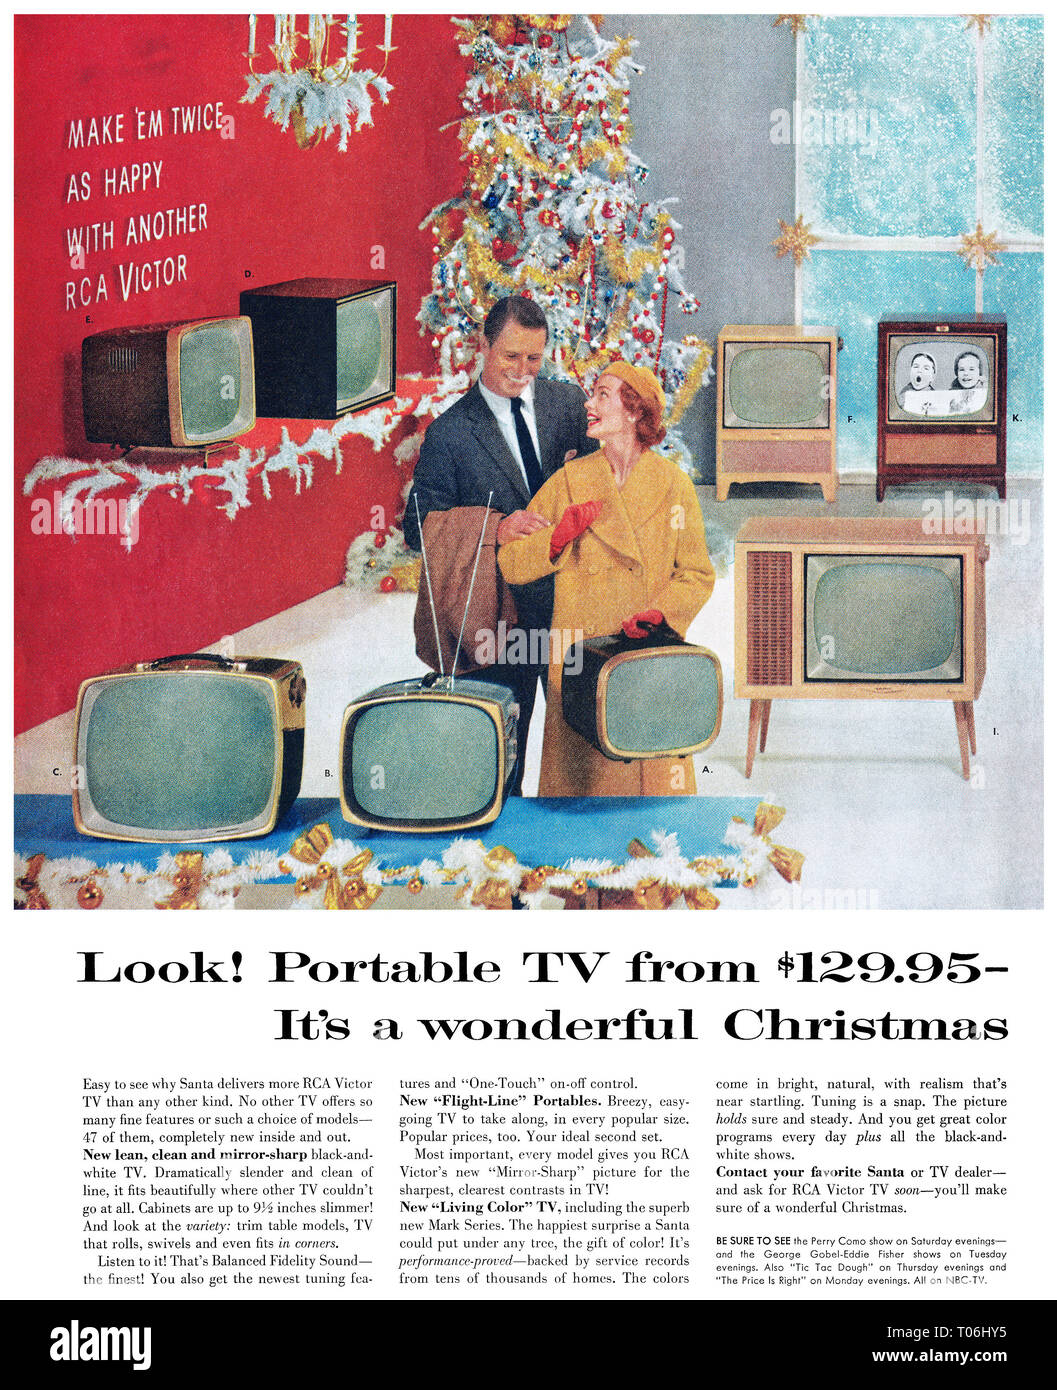 1957 U.S. Christmas advertisement for RCA Victor televisions. Stock Photo